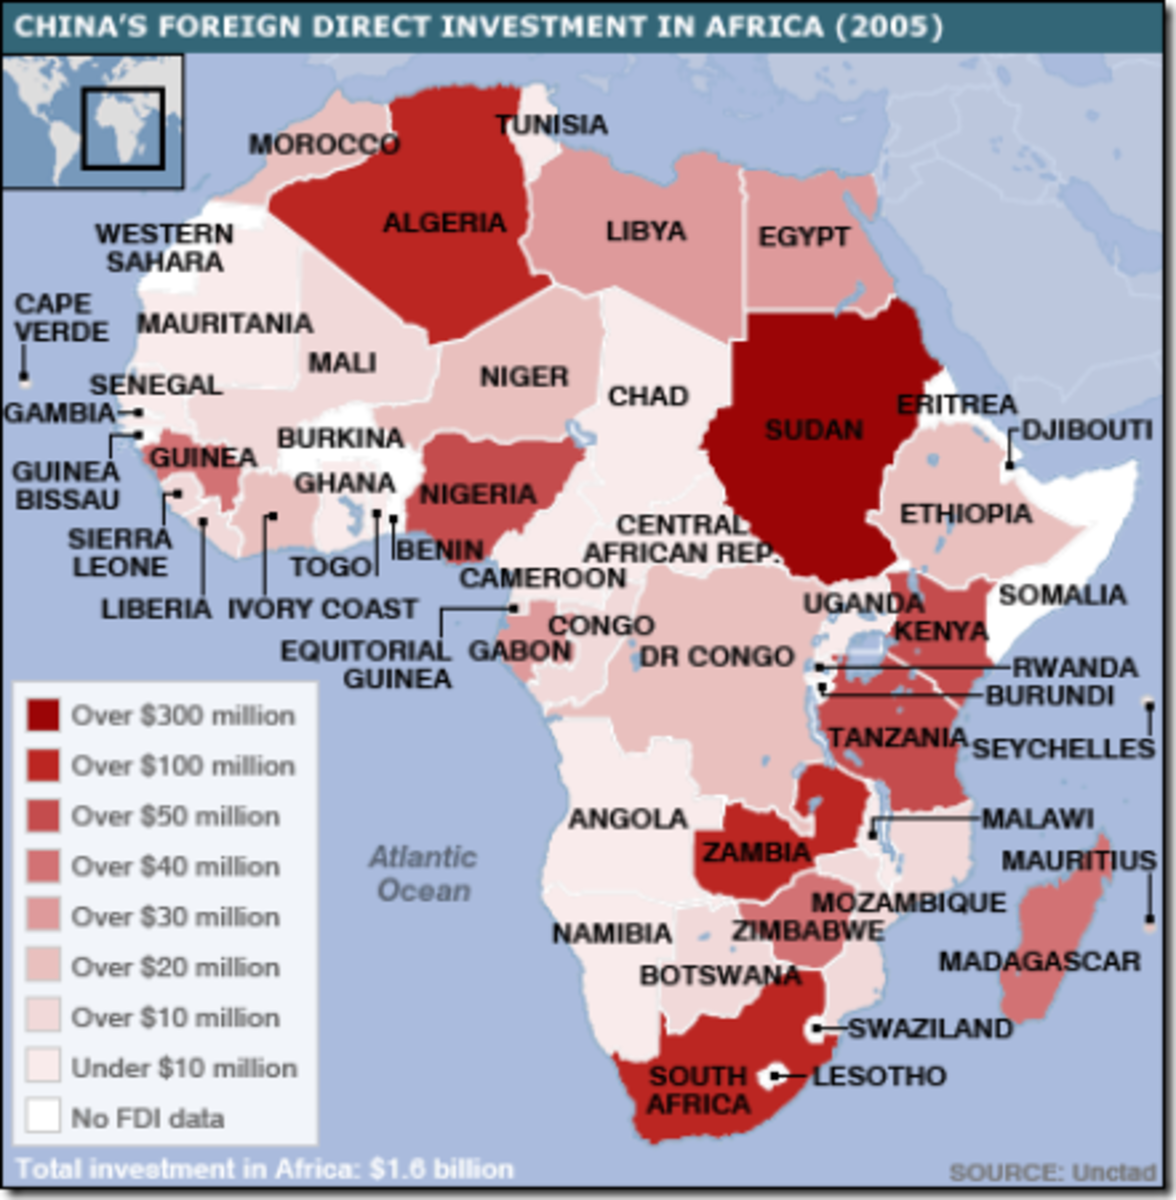 Chinese investments in Africa